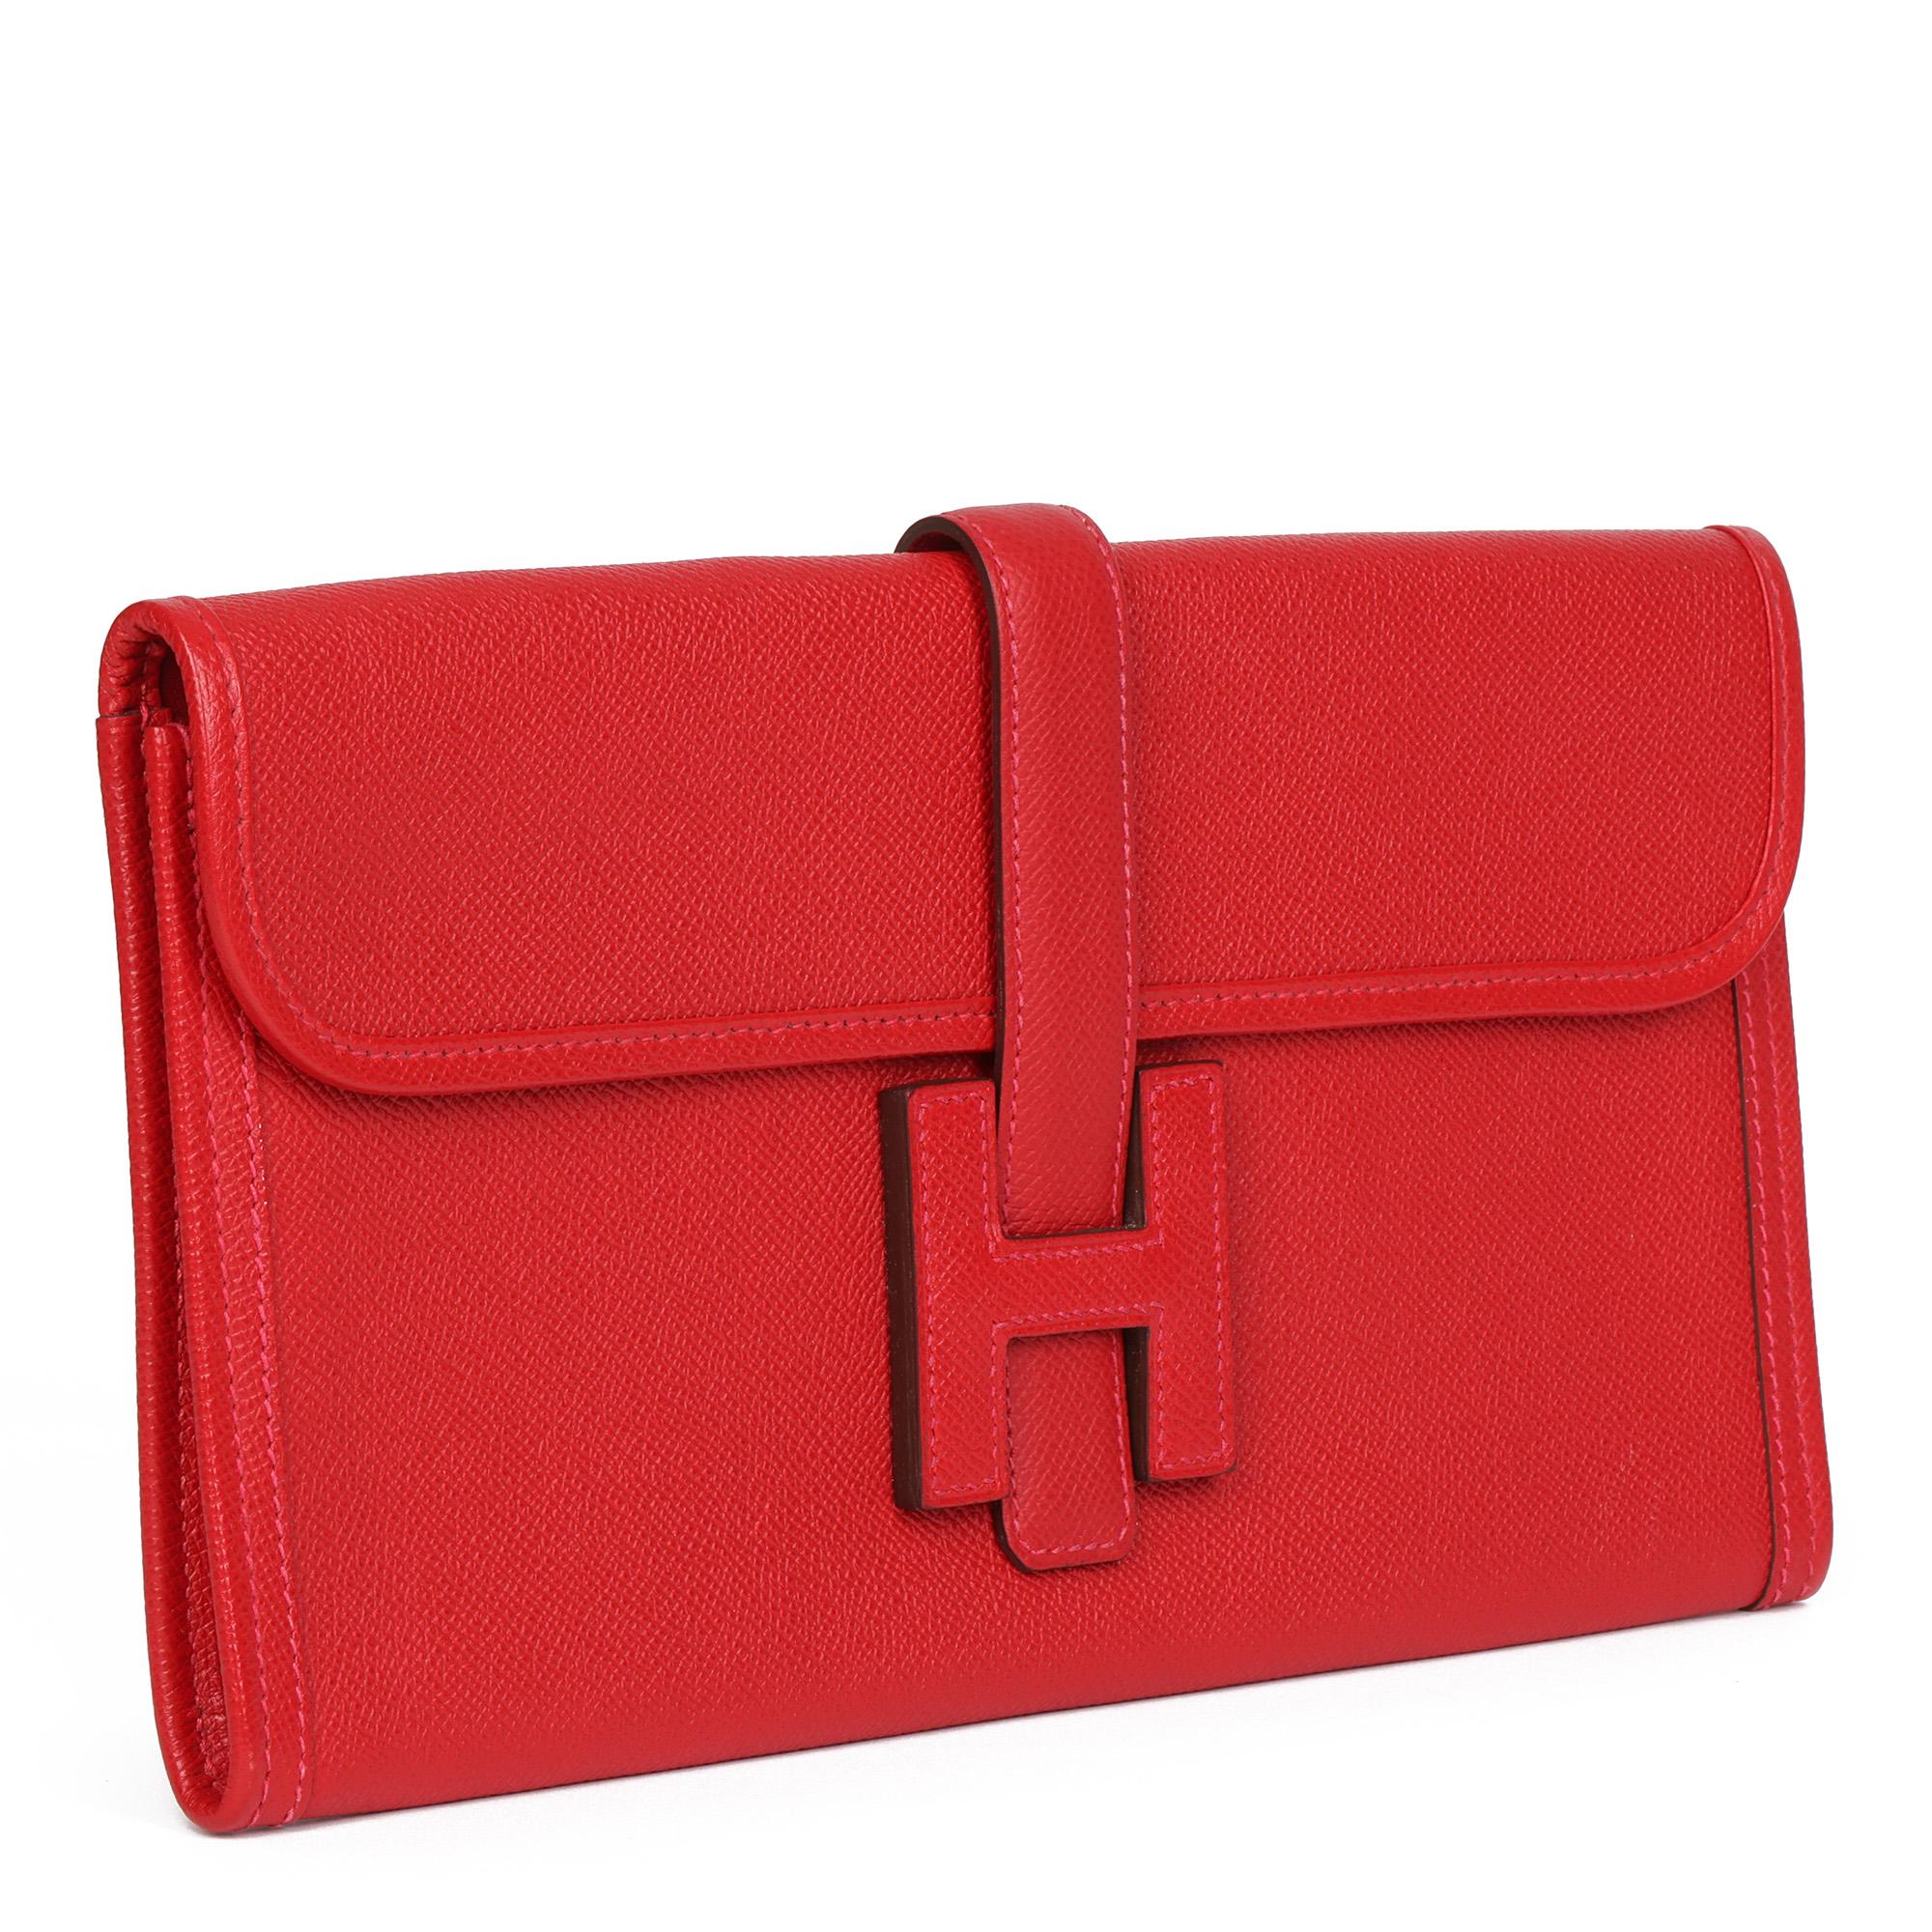 HERMÈS
Rouge Garance Epsom Leather Jige Elan 29

Xupes Reference: CB387
Serial Number: [Q]
Age (Circa): 2013
Accompanied By: Hermès Dust Bag, Box,
Authenticity Details: Date Stamp (Made in France)
Gender: Ladies
Type: Clutch

Colour: Rouge